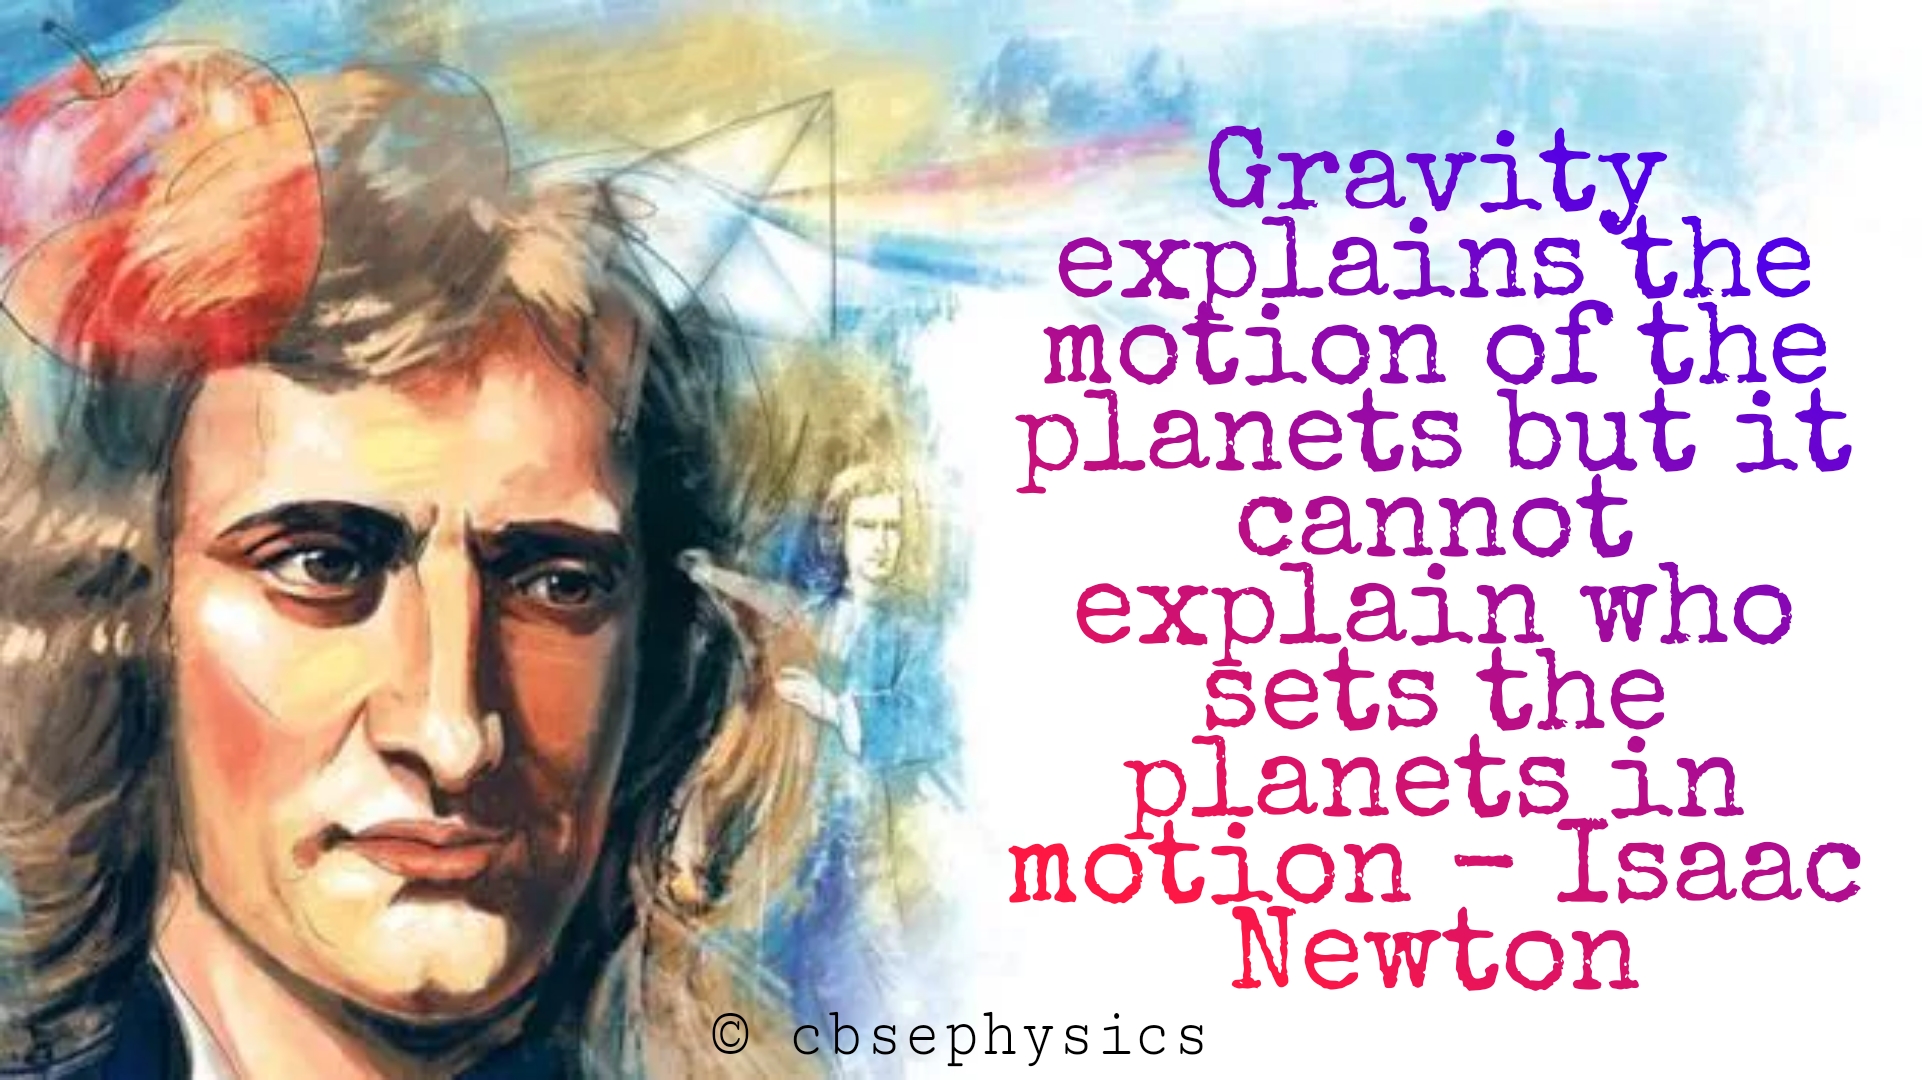 Newton's quote about gravitation